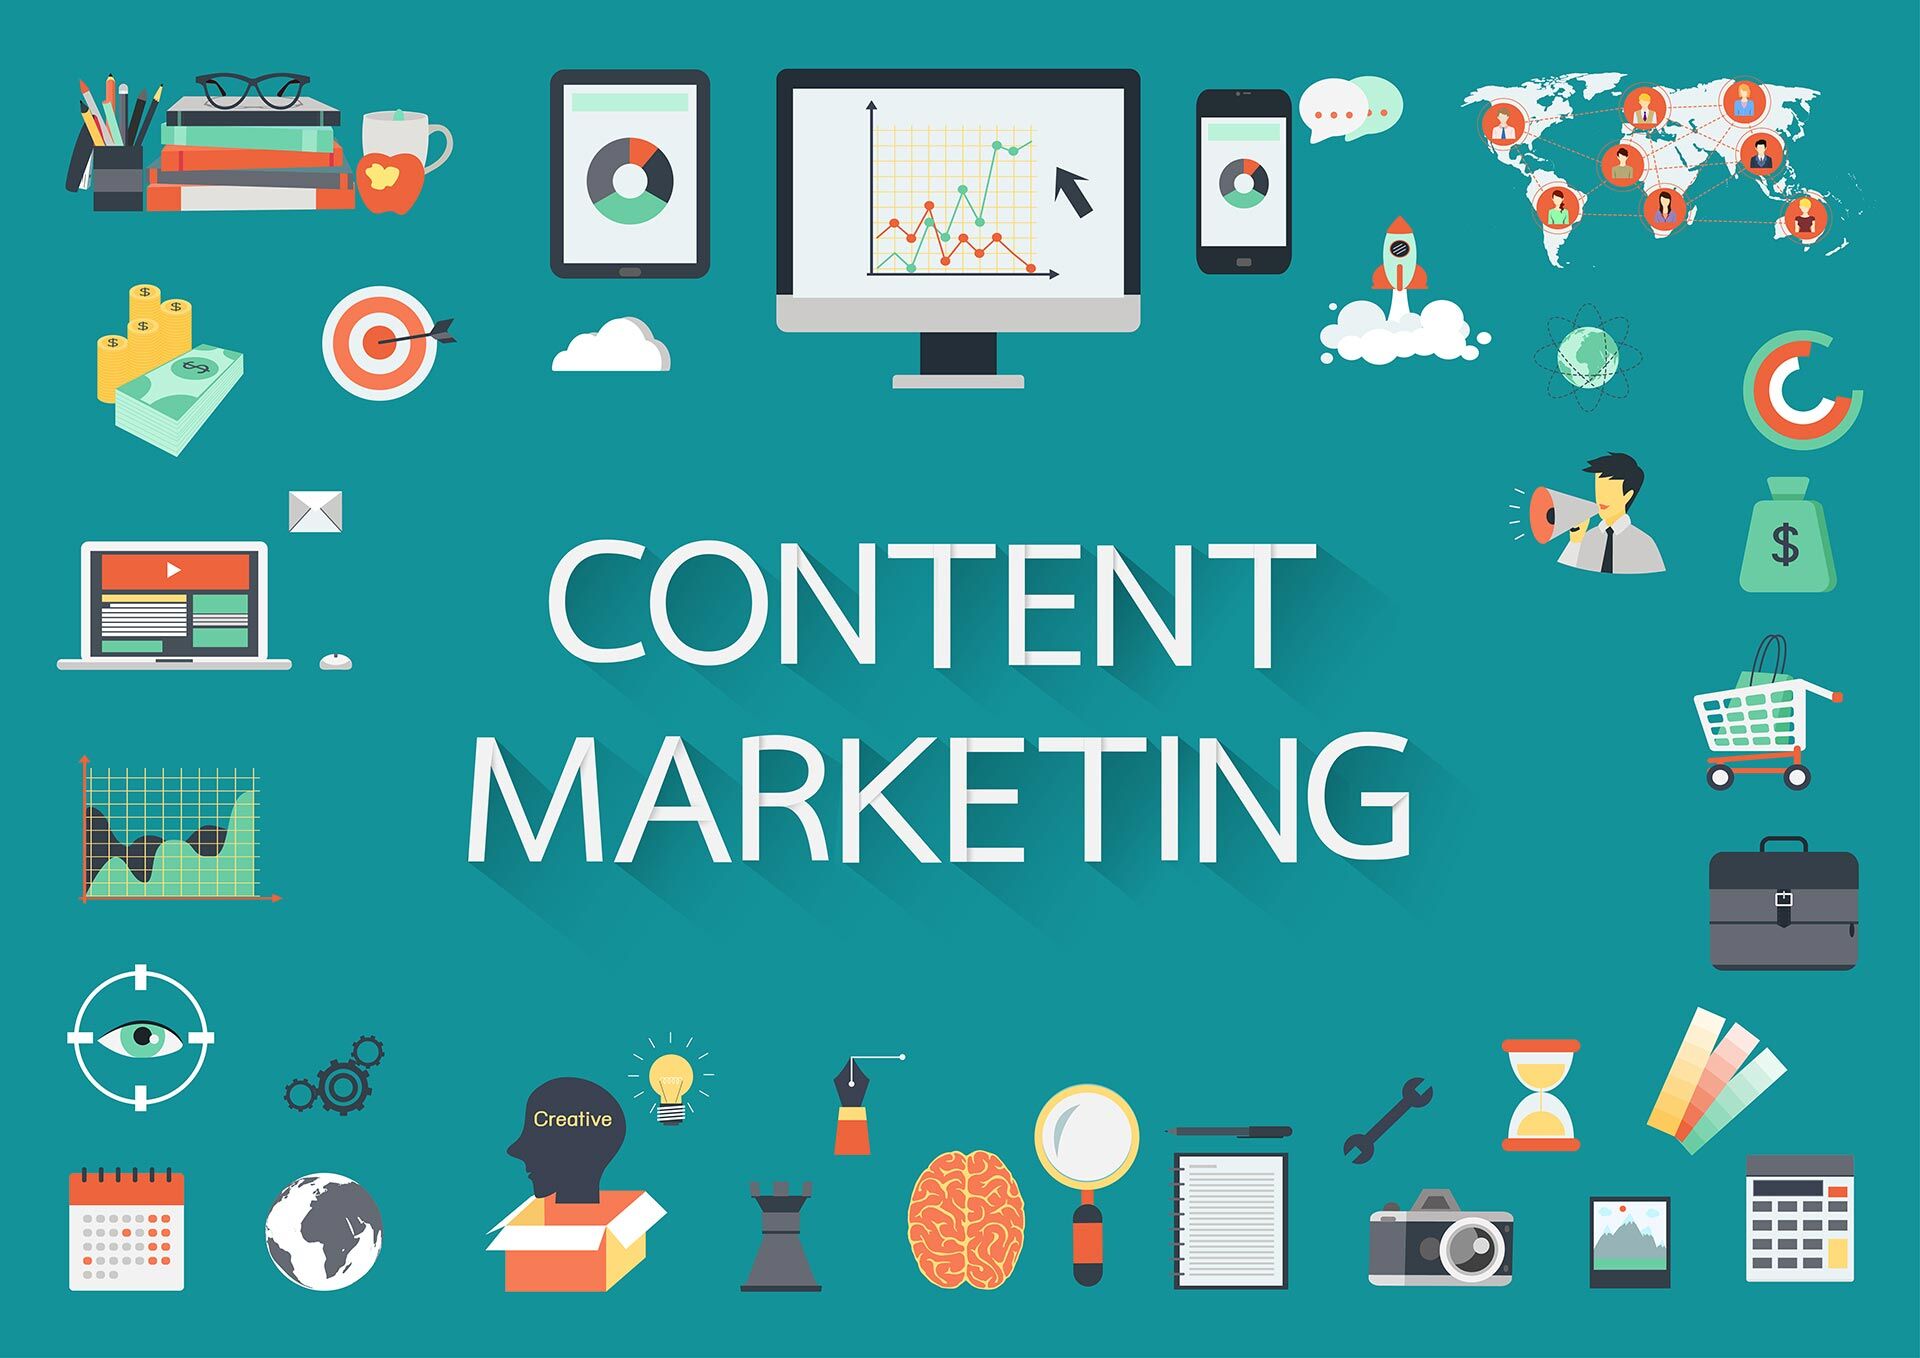 many items that go into the creative process of content marketing